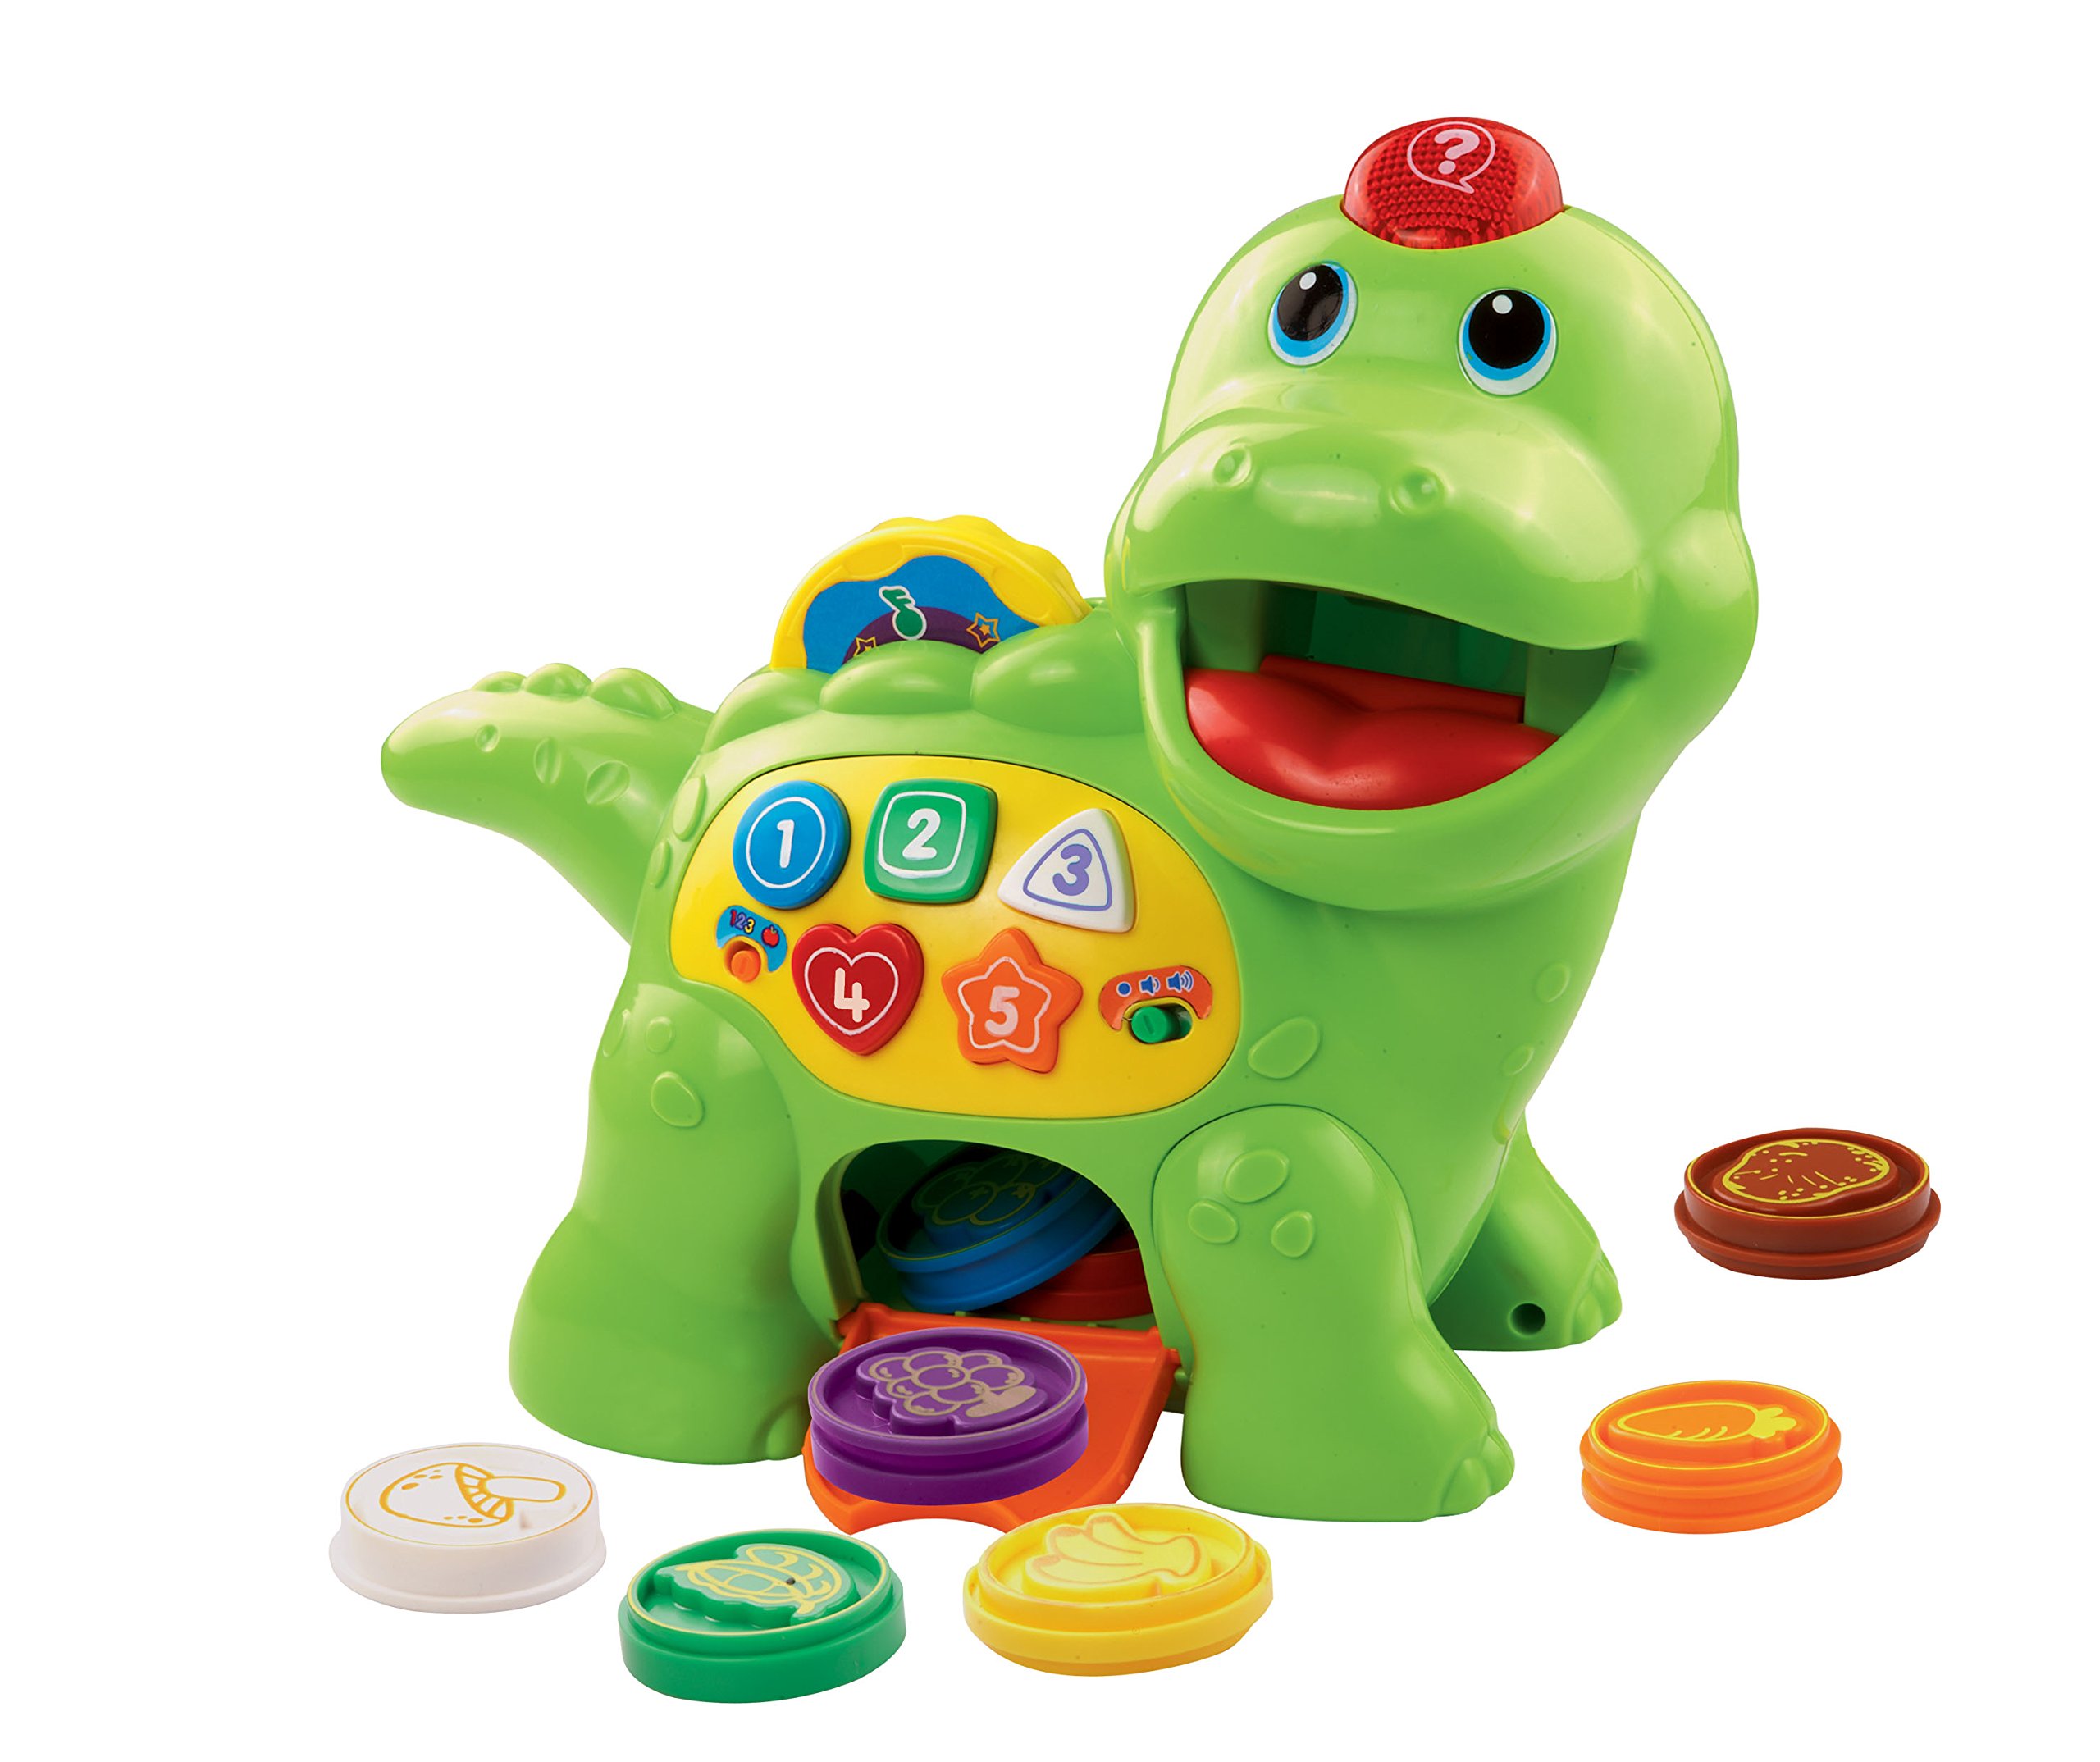 VTech Baby Feed Me Dino , Musical Baby Toy with Numbers, Counting Music & Shapes , Interactive Light Up Toy Suitable From 1, 2, 3 Year Olds Boys & Girls, Green, 27 x 12.3 x 26 cm